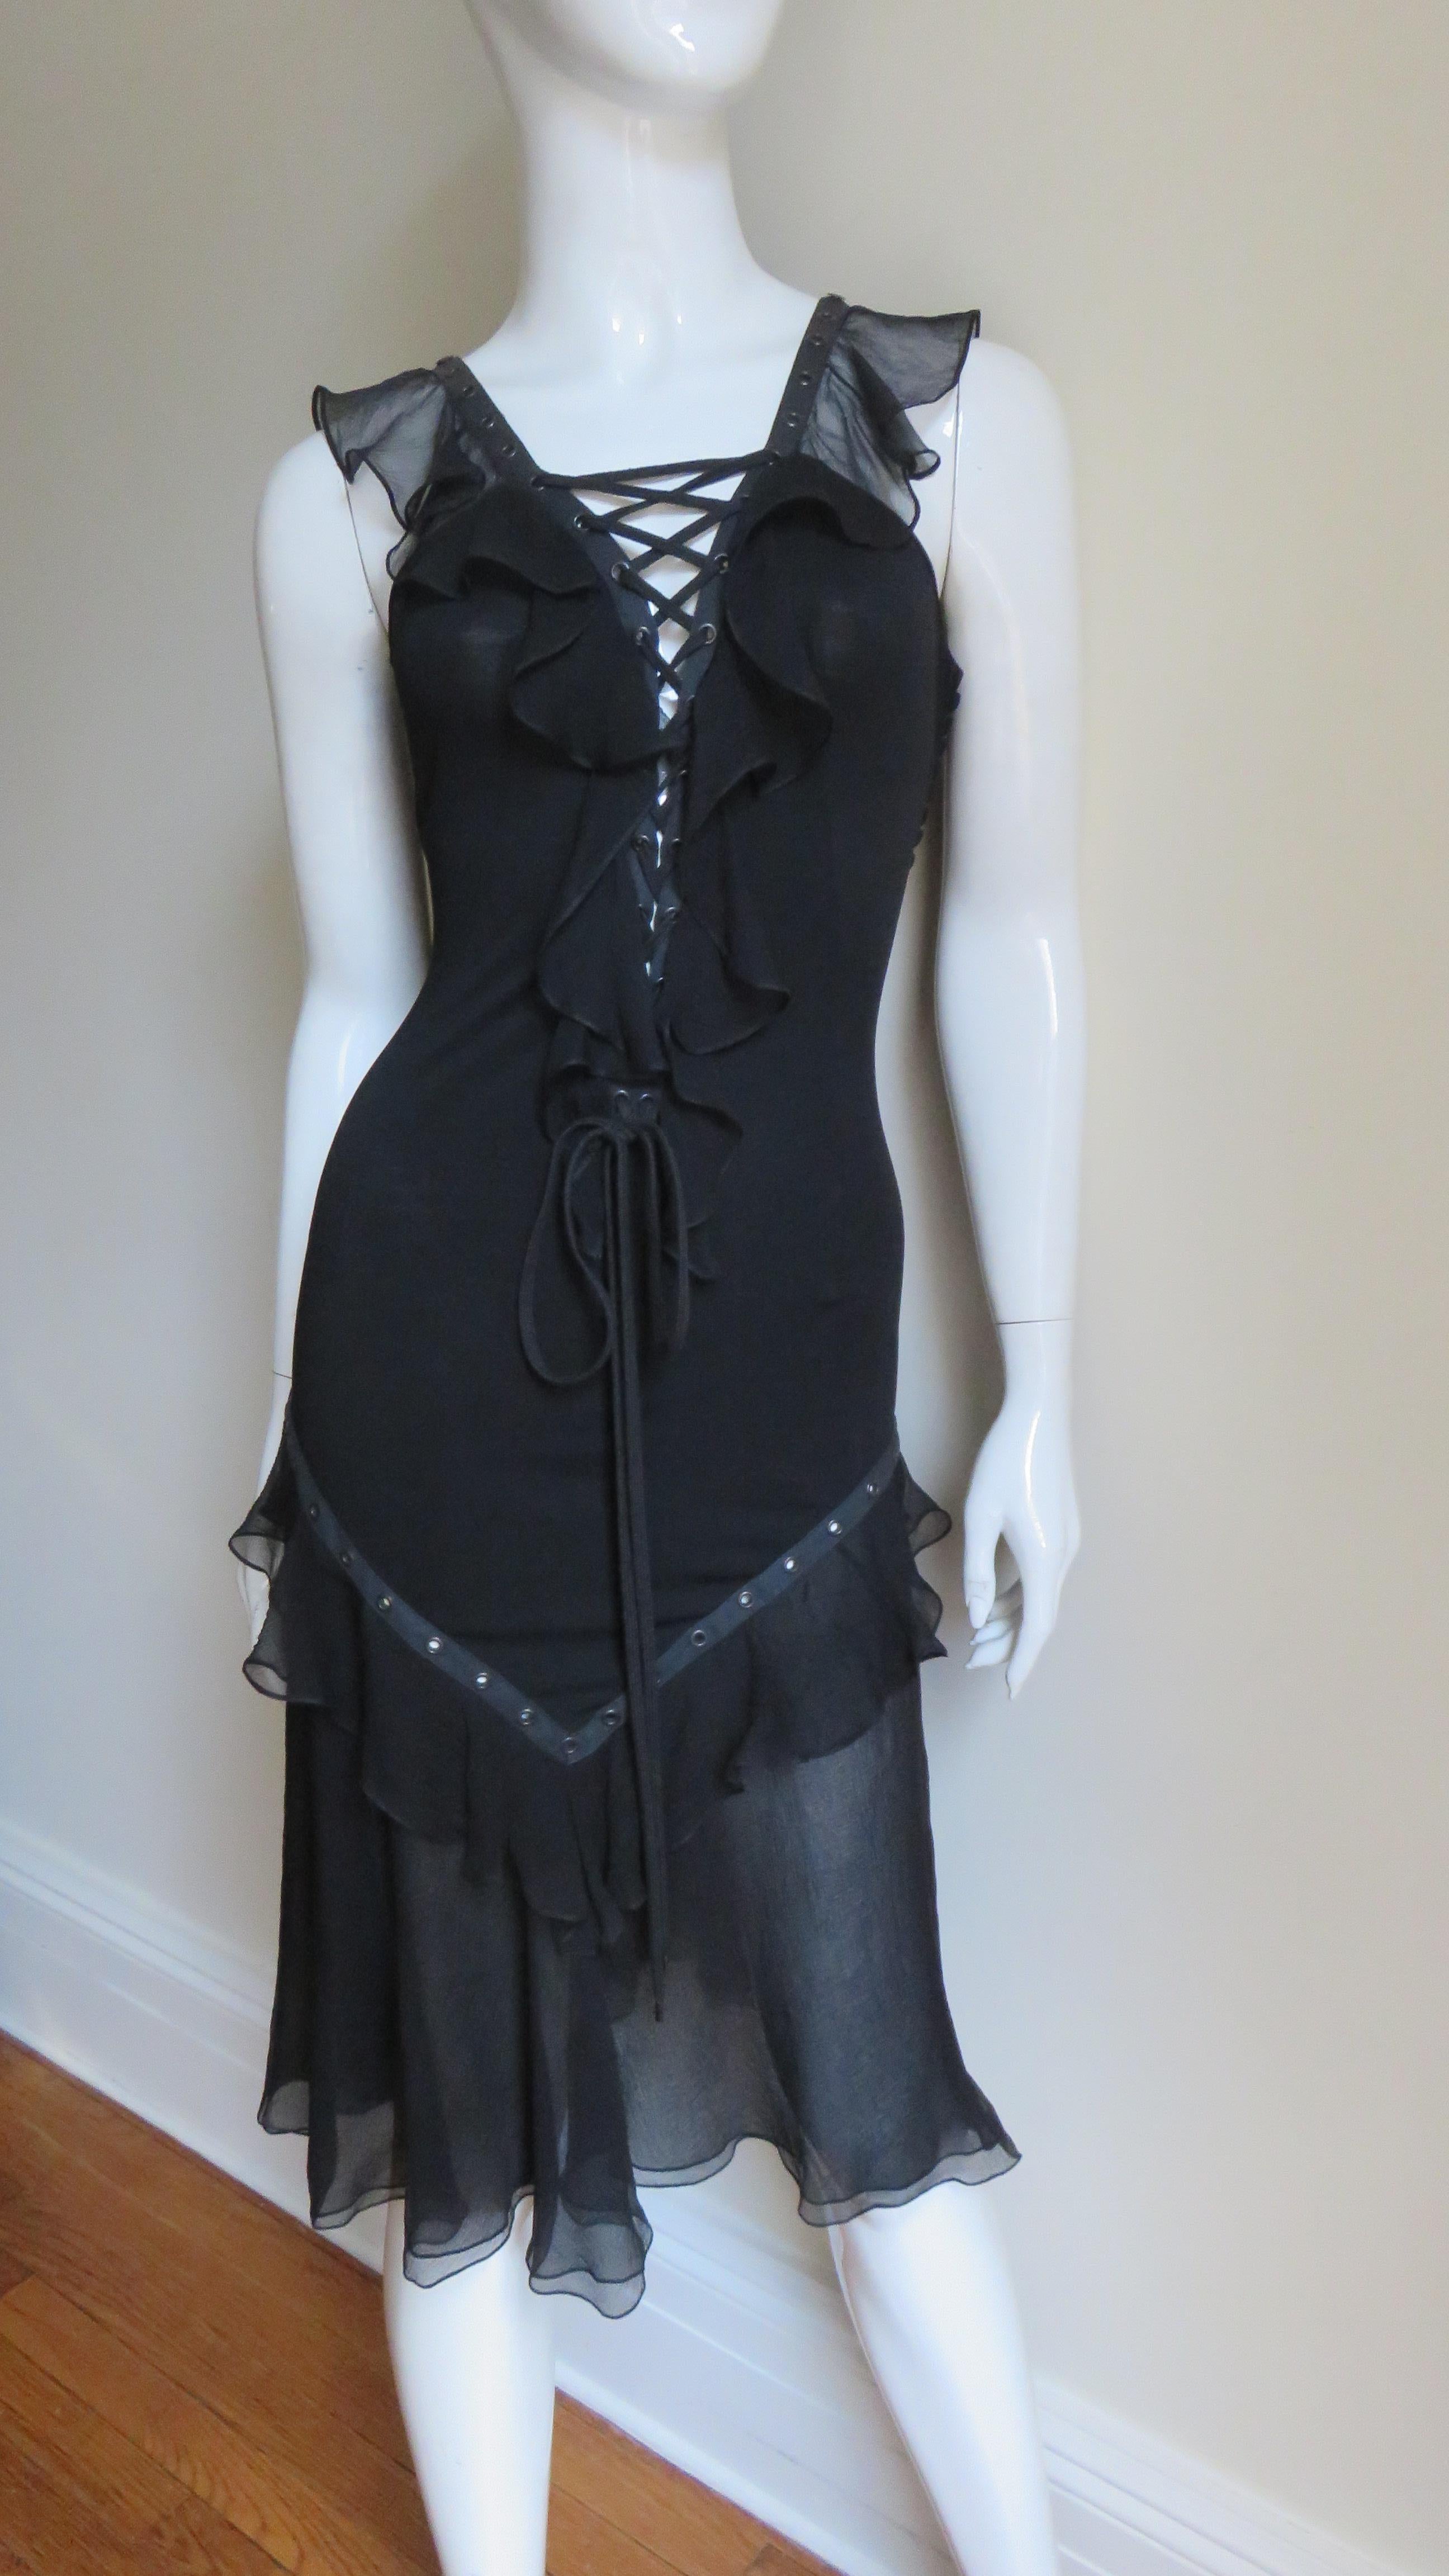 A gorgeous black silk dress by John Galliano for Christian Dior.  The body of the dress is made of fine black stretch silk with functional adjustable lacing at the center front and back from the neckline through to the waist framed in a semi sheer